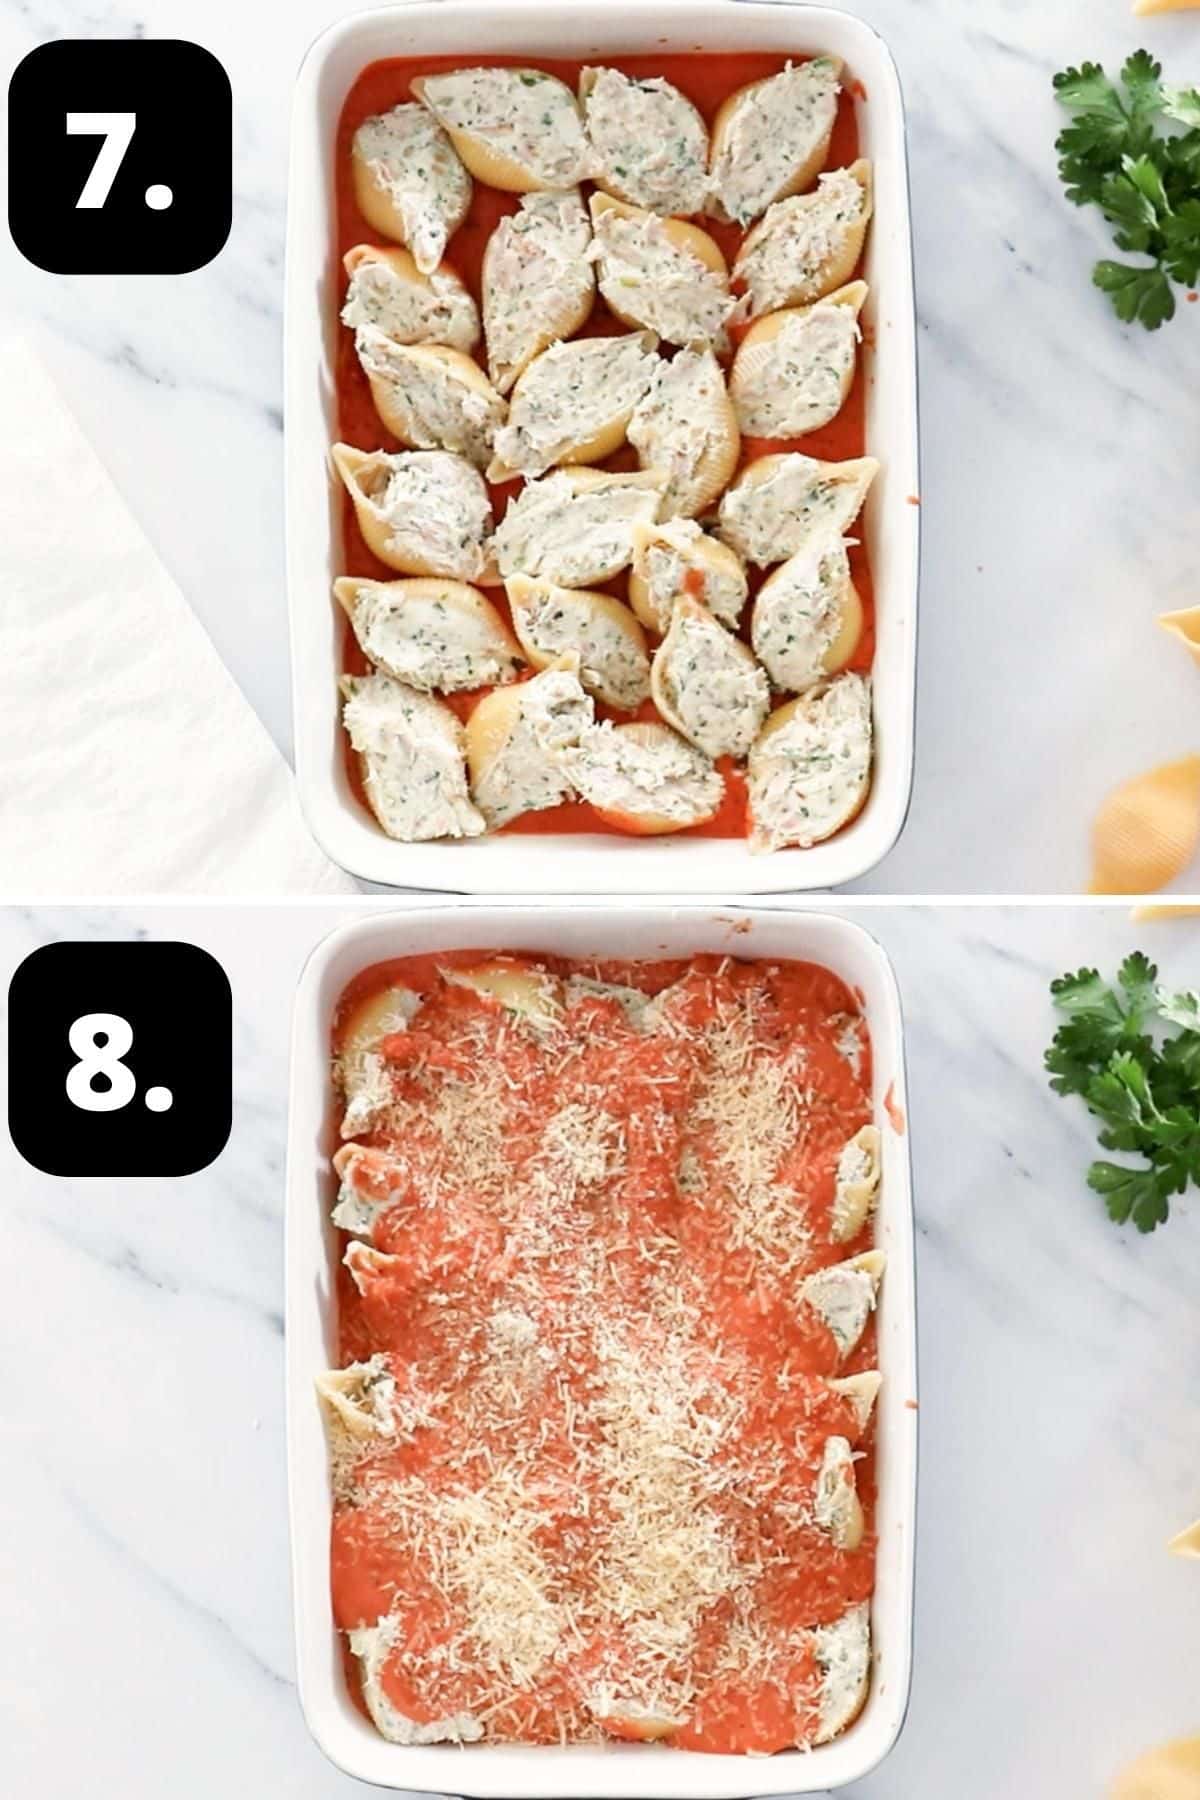 Steps 7-8 of preparing this recipe - the filled pasta shells in baking dish and topped with the sauce and Parmesan cheese.